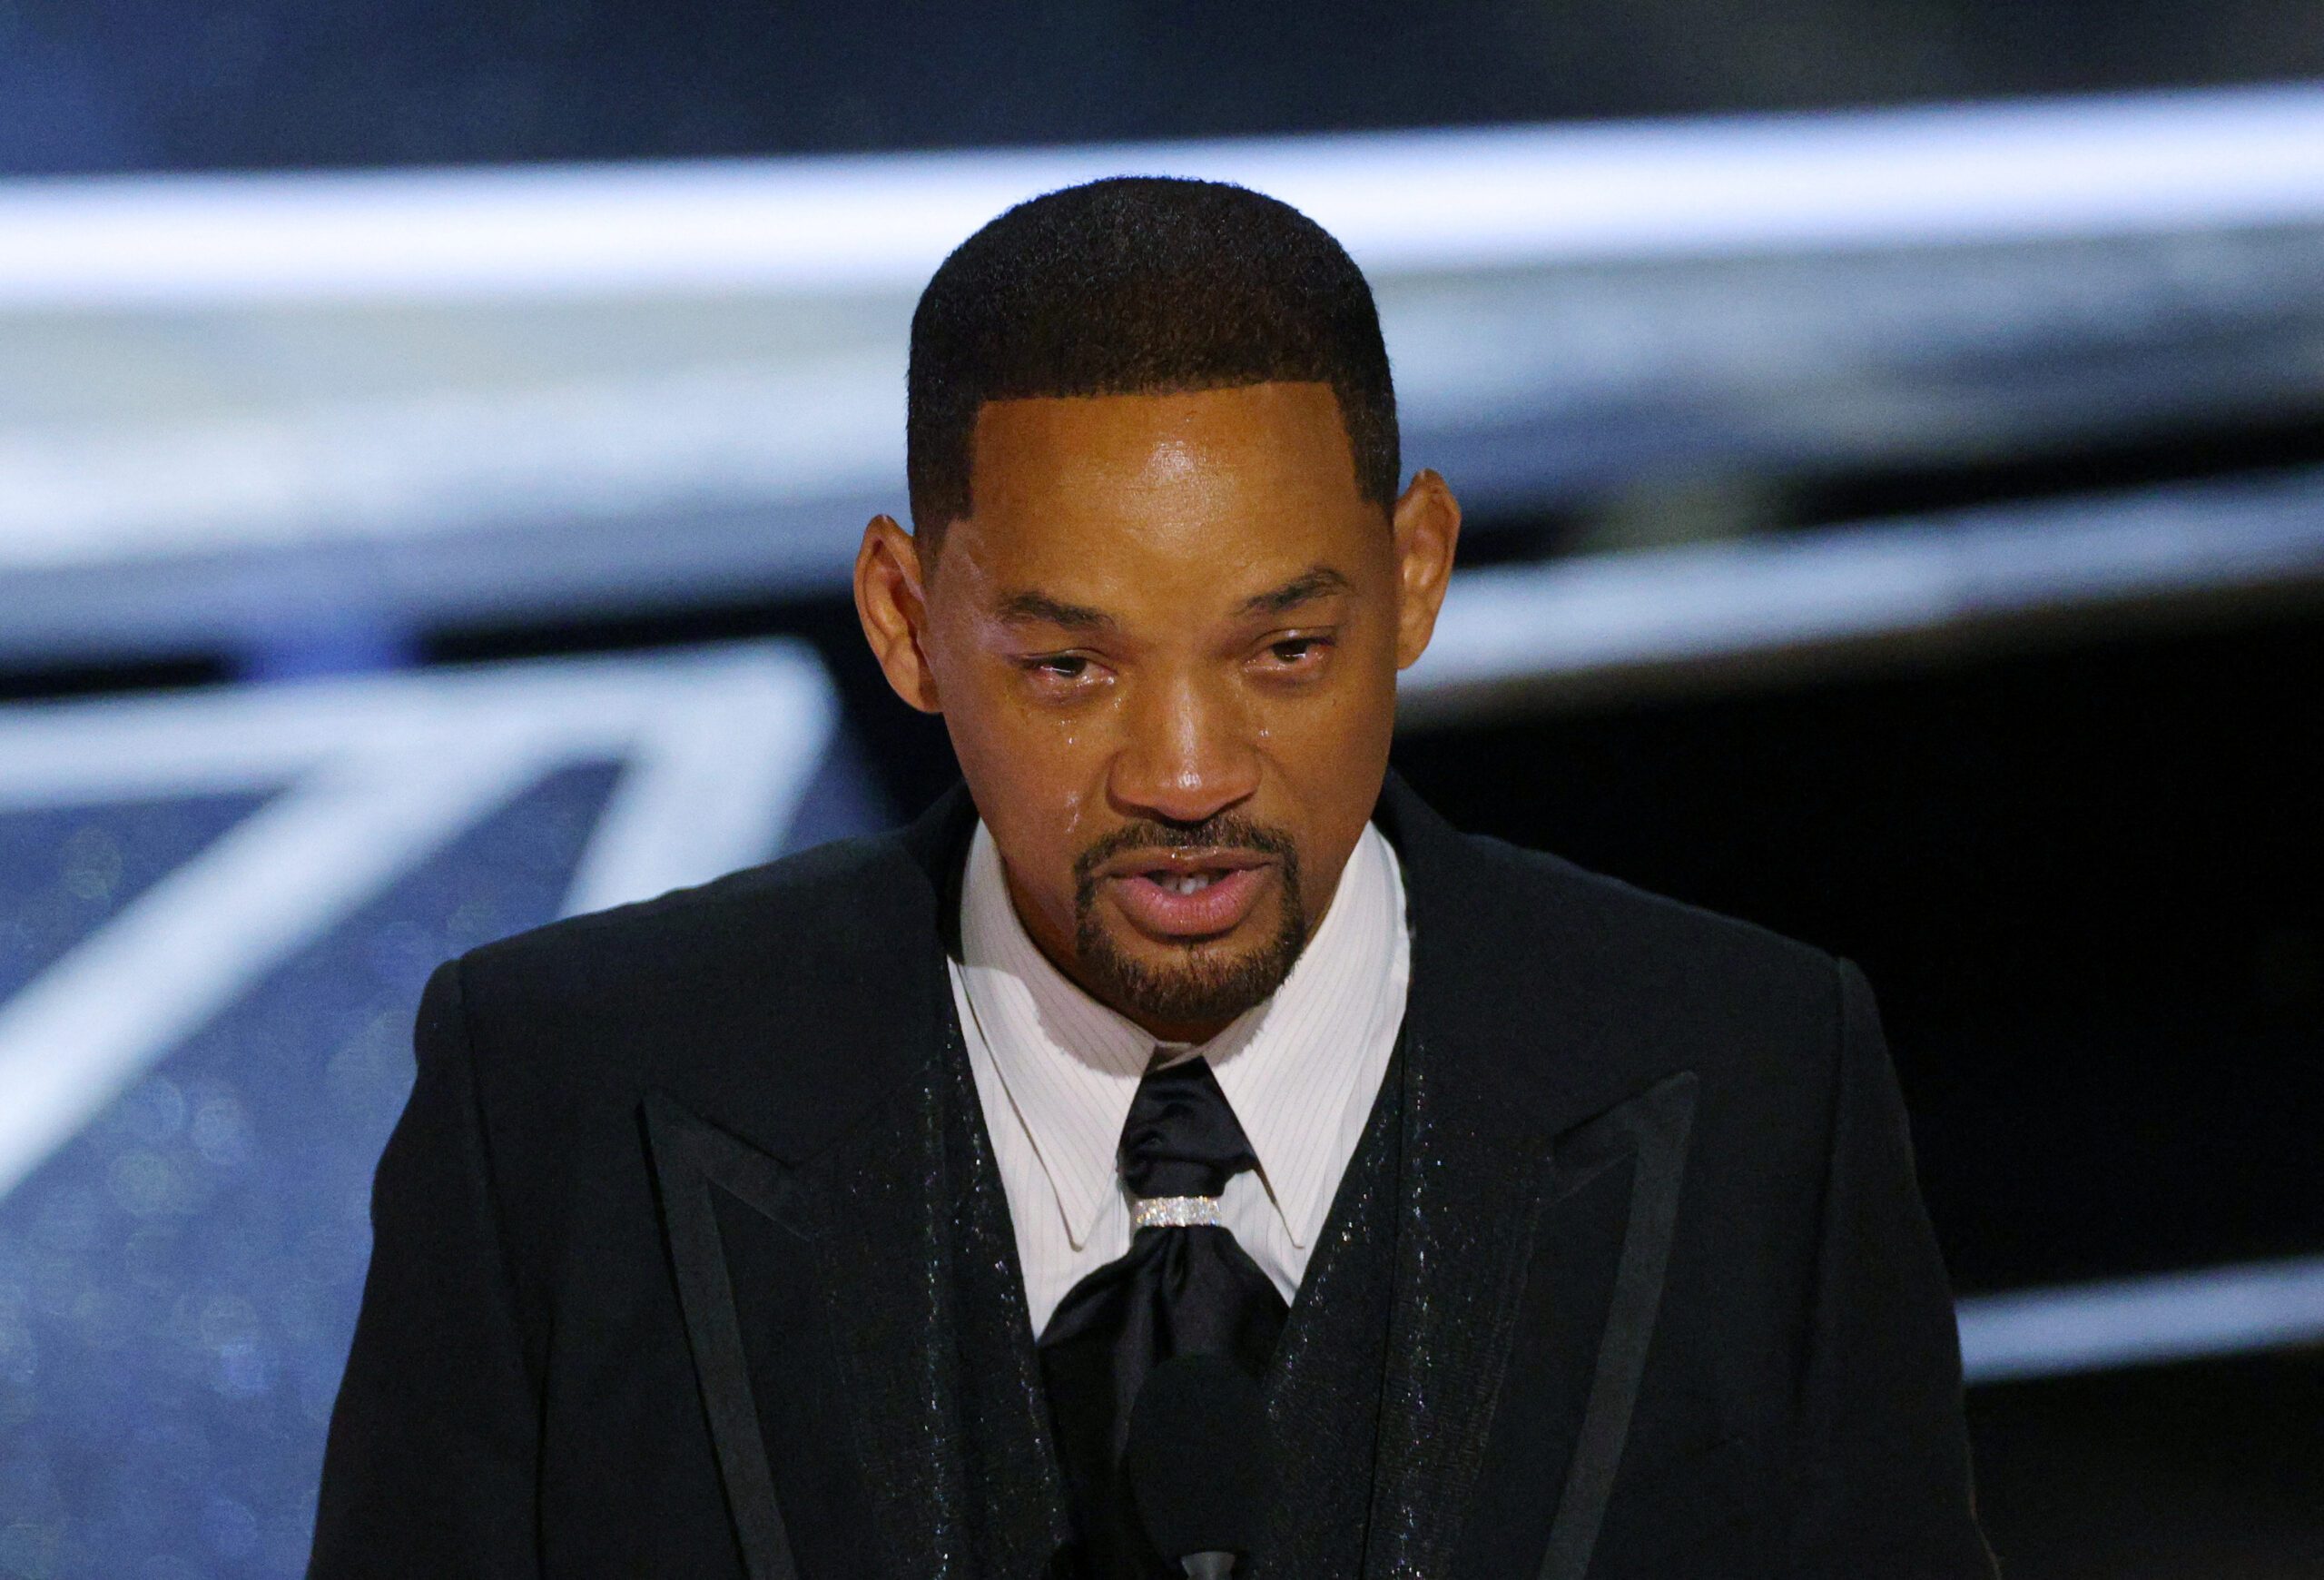 Will Smith on slapping Chris Rock at Oscars: ‘I lost it’